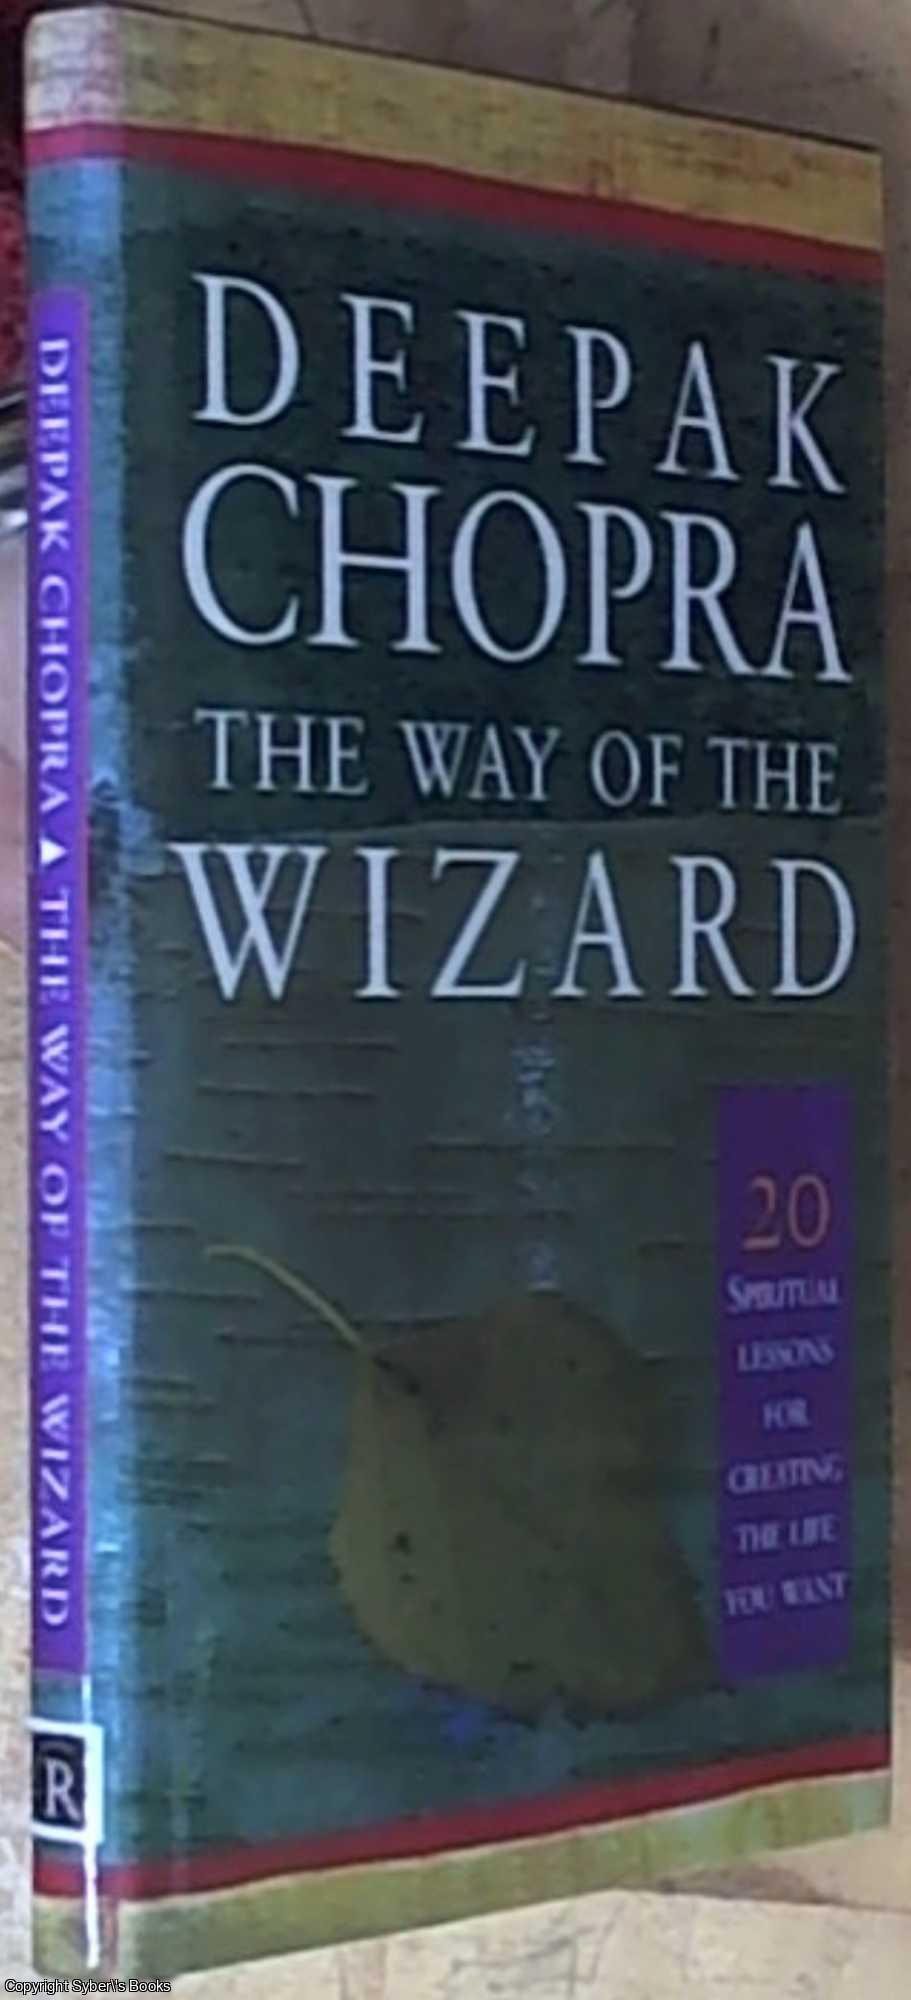 Chopra, Deepak - The Way of the Wizard; 20 Spiritual Lessons for Creating the Life You Want